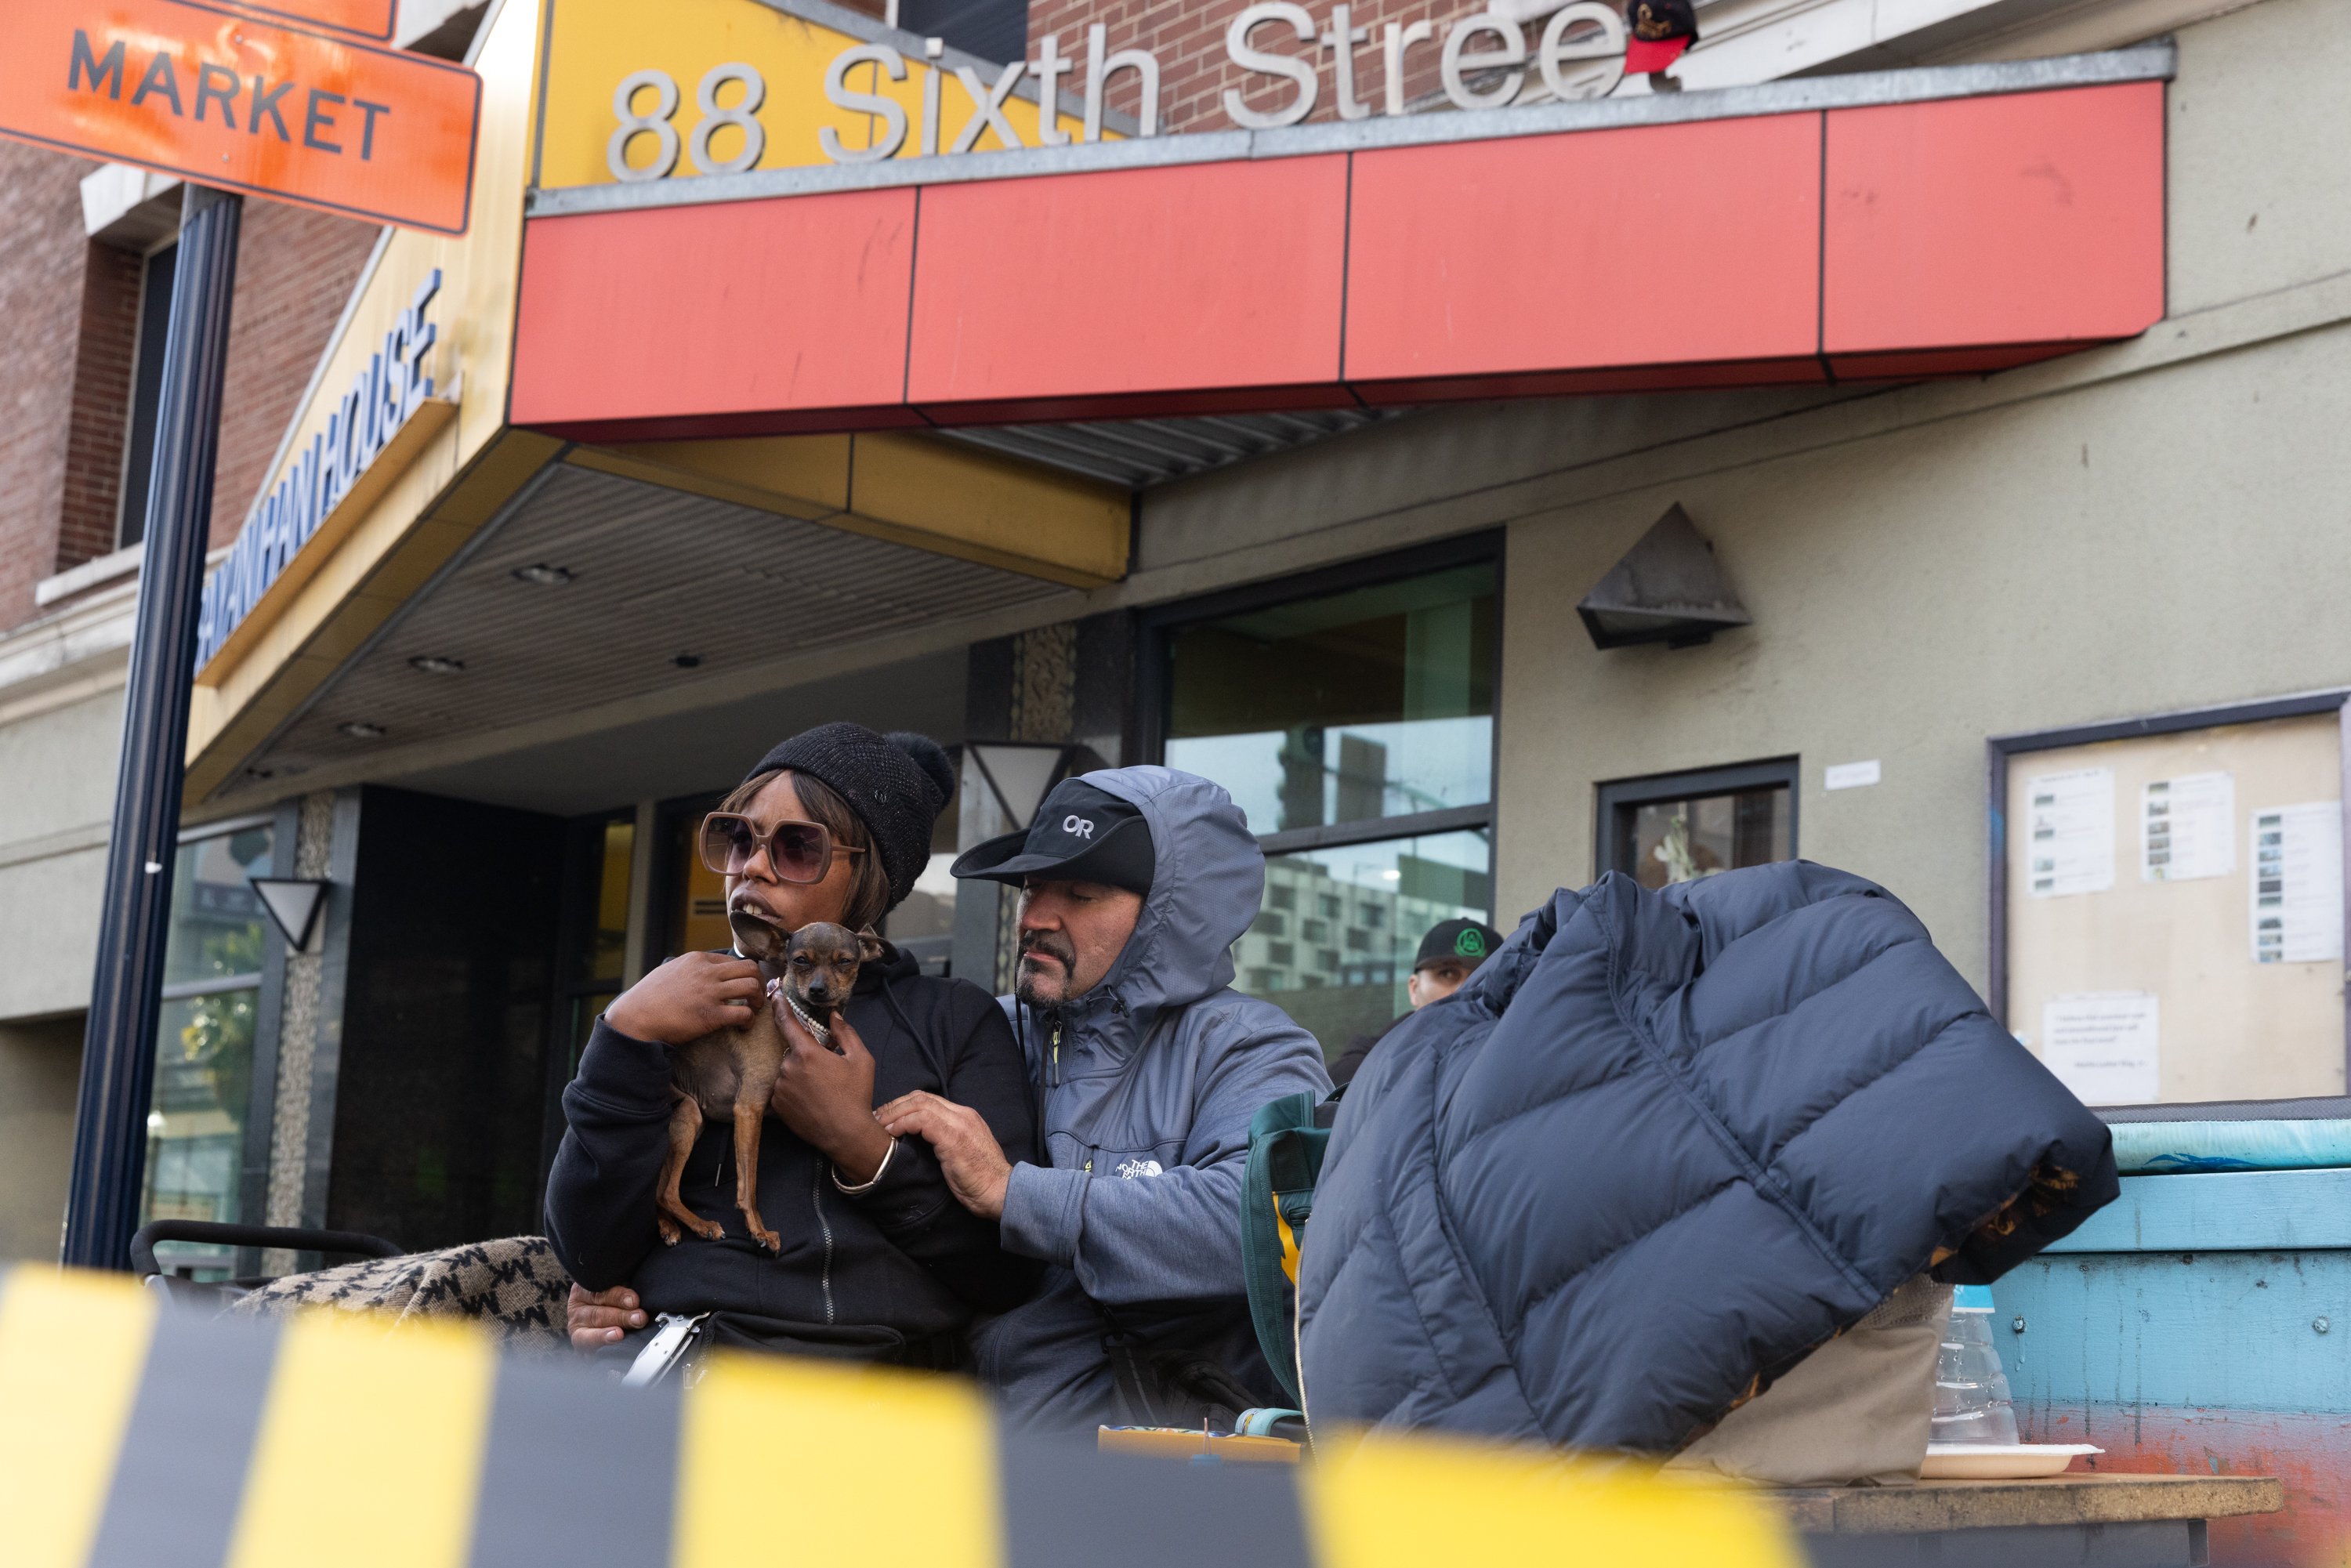 A woman holding a dog sits on a man's lap on sixth street.